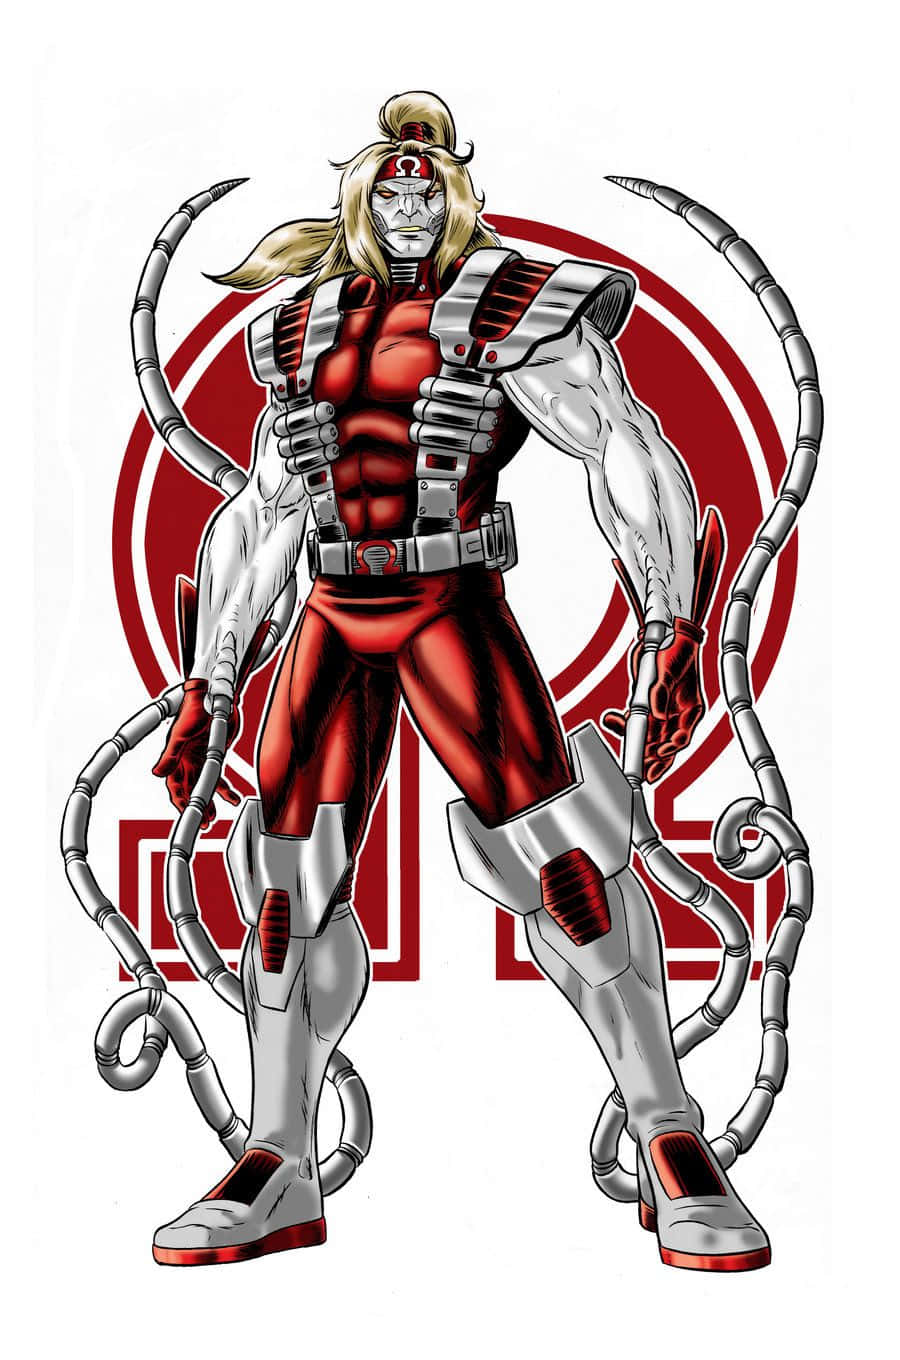 Omega Red, the fearsome mutant villain Wallpaper